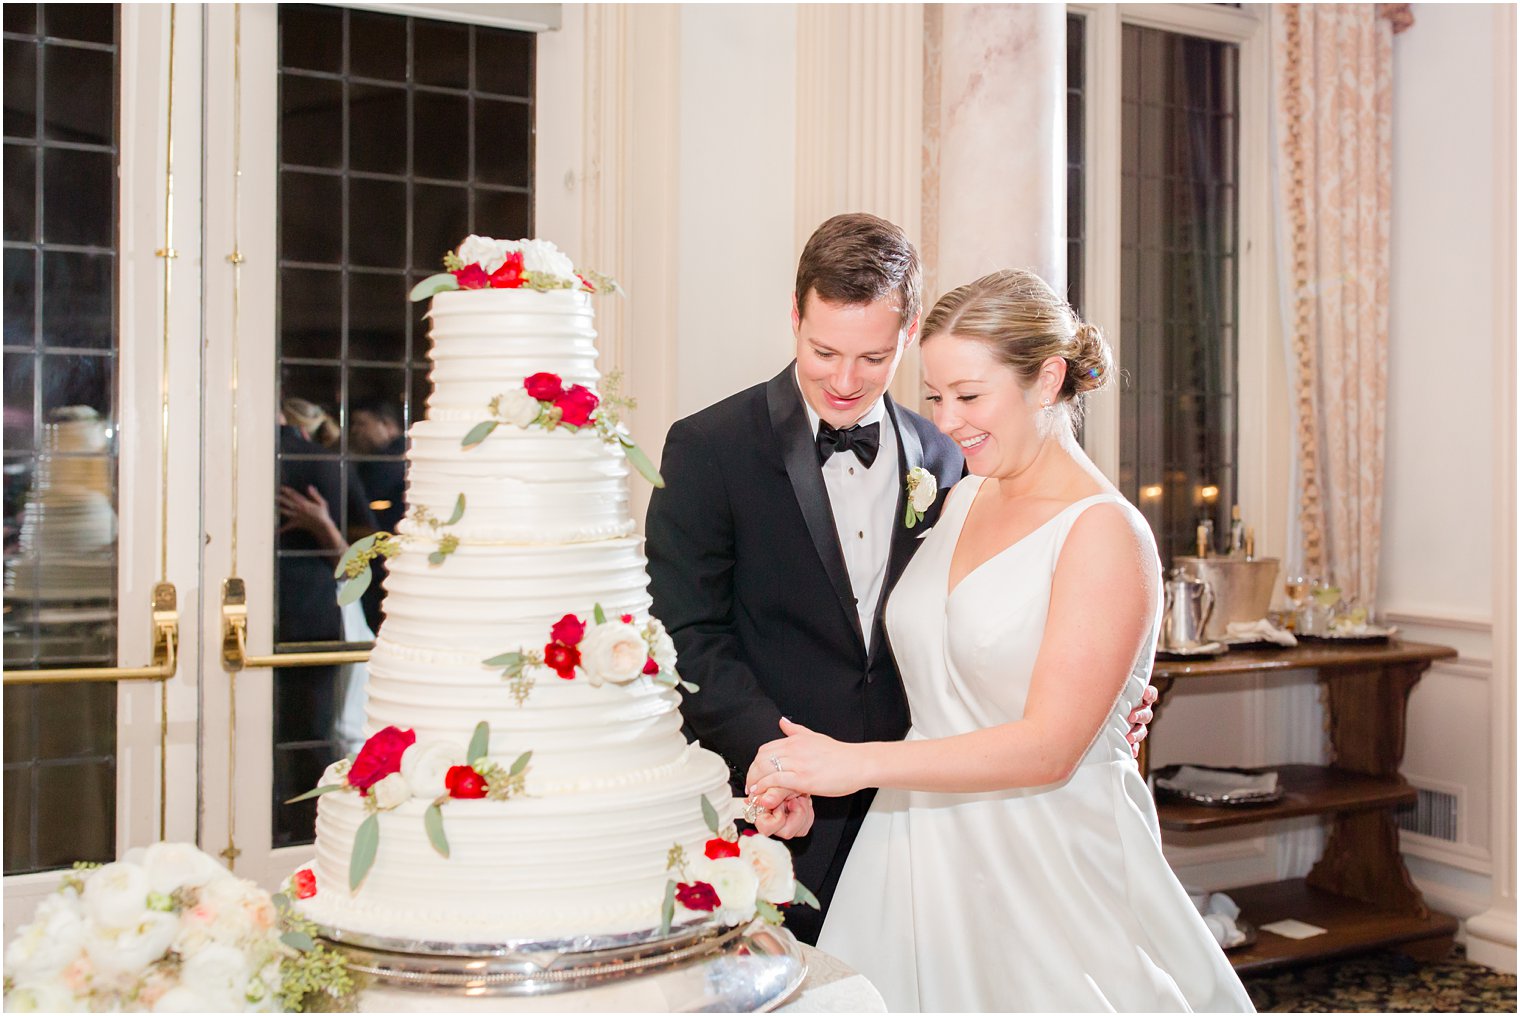 bride and groom cutting their wedding cake at Pleasantdale Chateau